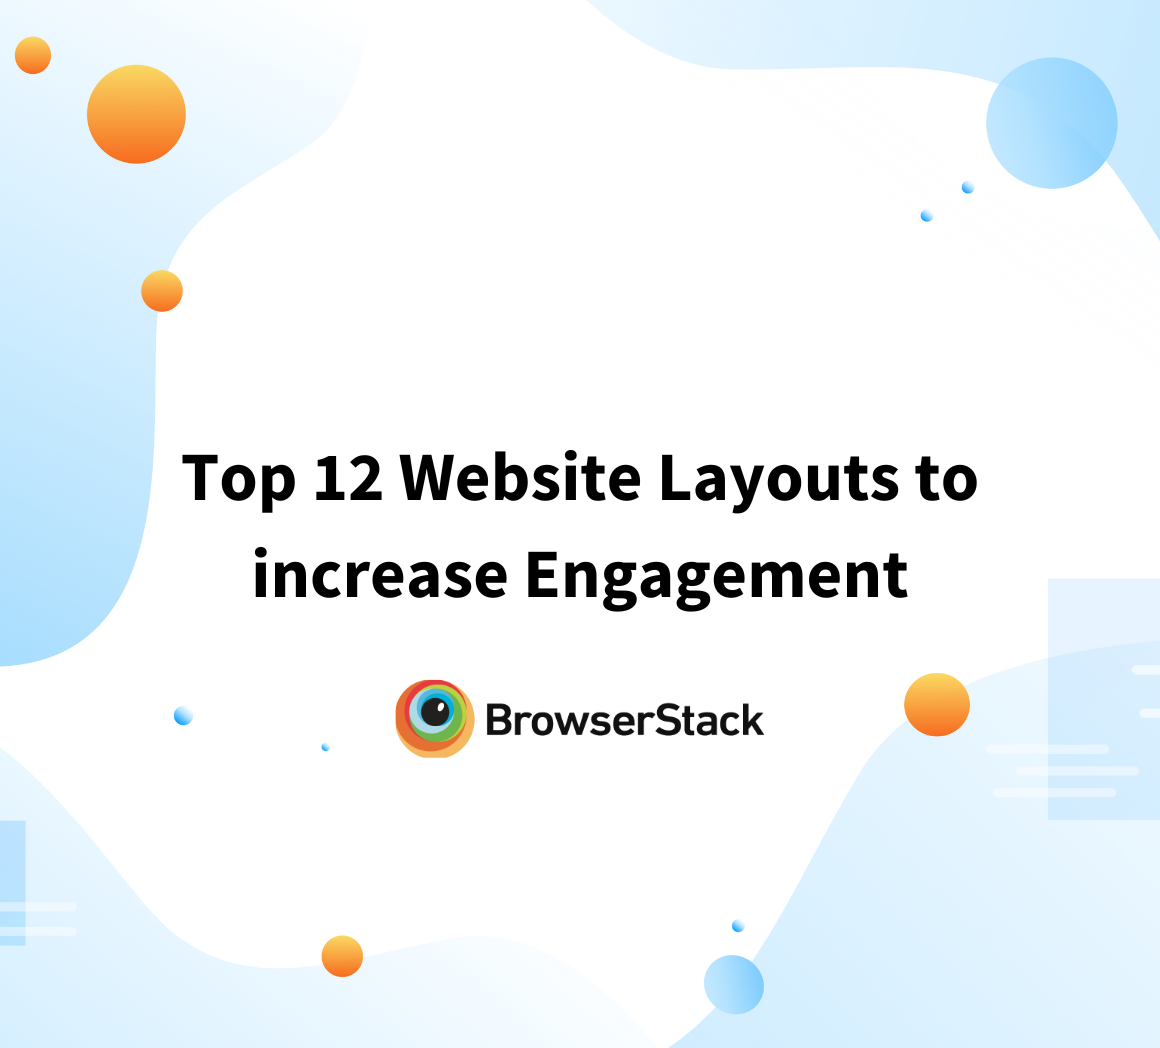 Top 12 Website Layouts to increase Engagement